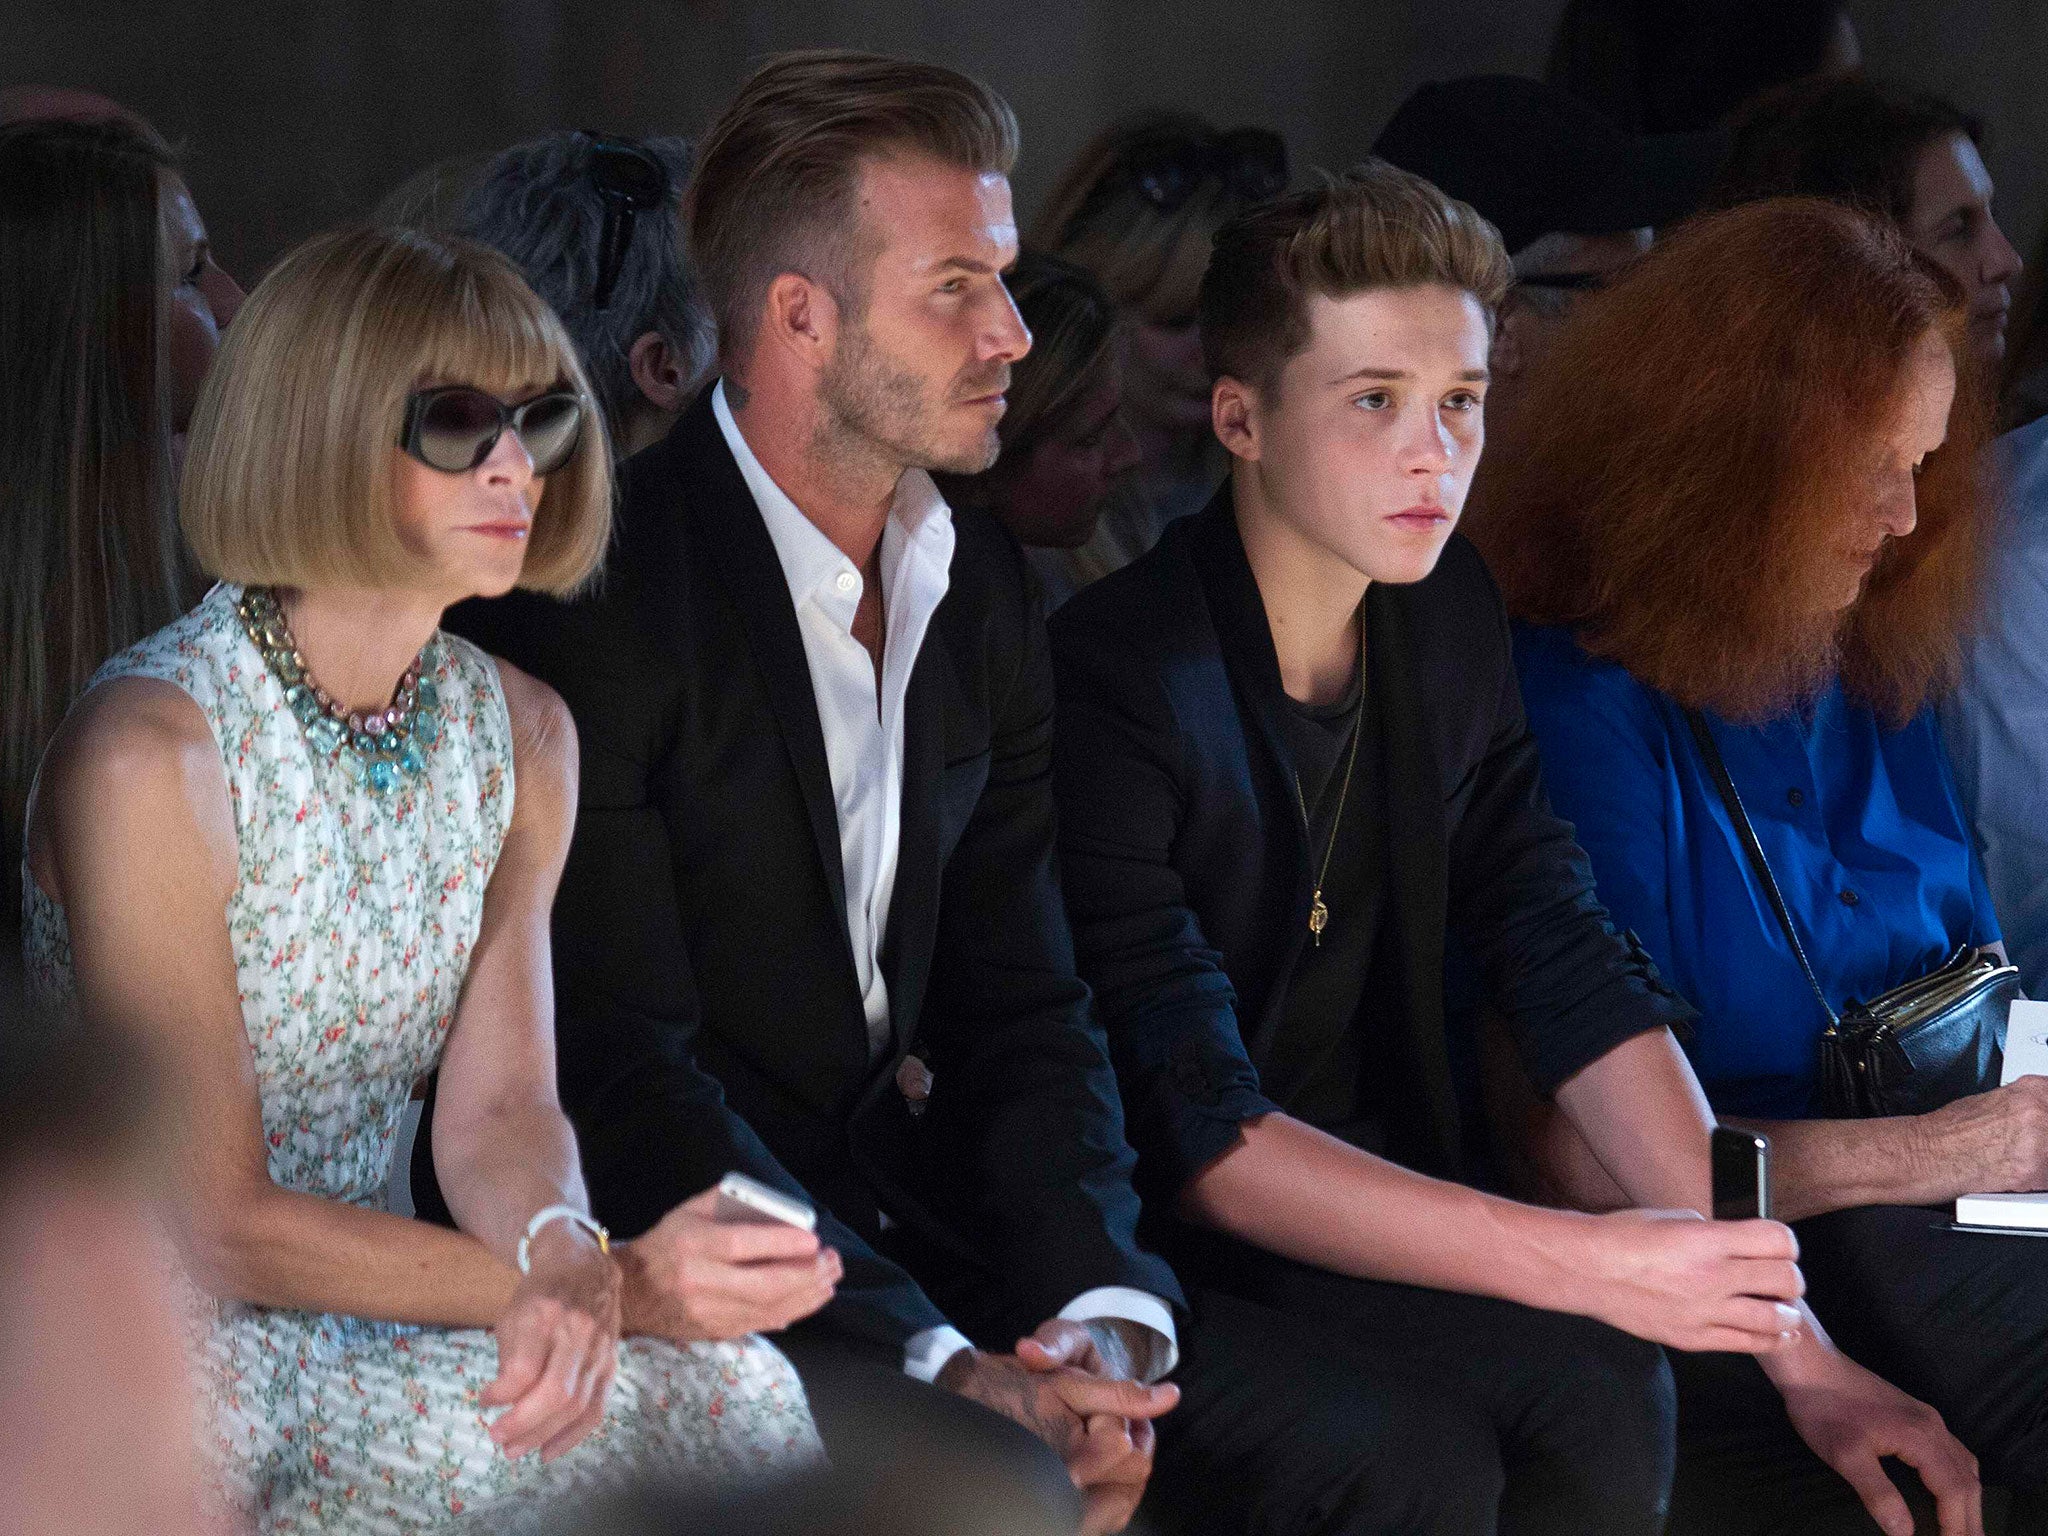 David Beckham, centre, on the front row with Vogue editor Anna Wintour, left, and Brooklyn Beckham, right